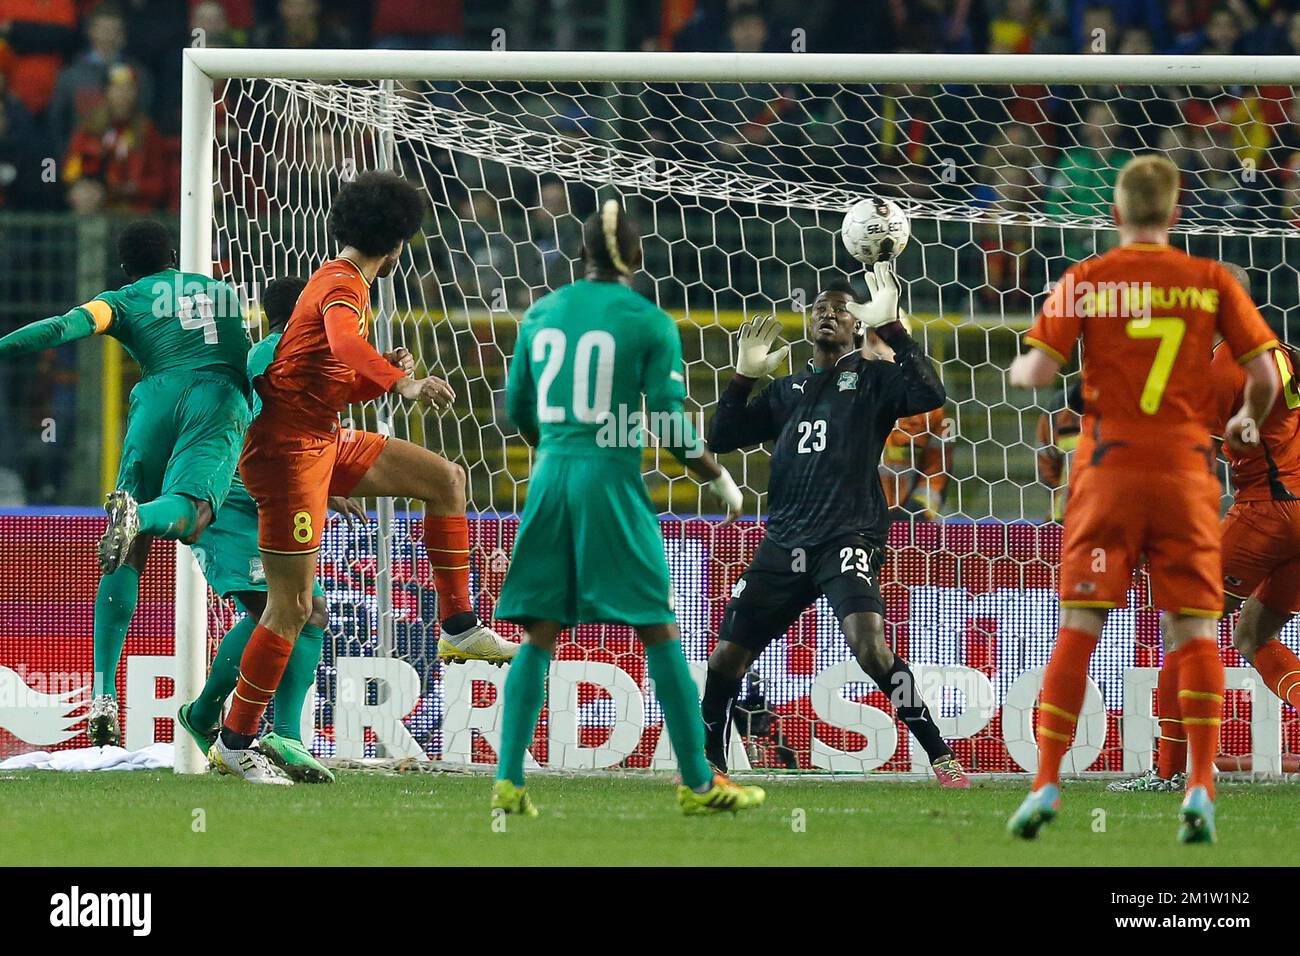 Belgium's Marouane Fellaini (2nd L) scores the 1-0 goal and Ivory Coast's goalkeeper Sayouba Mande can not stop it at a friendly soccer game between the Belgian national team the Red Devils and Ivory Coast, Wednesday 05 March 2014 in Brussels.  Stock Photo